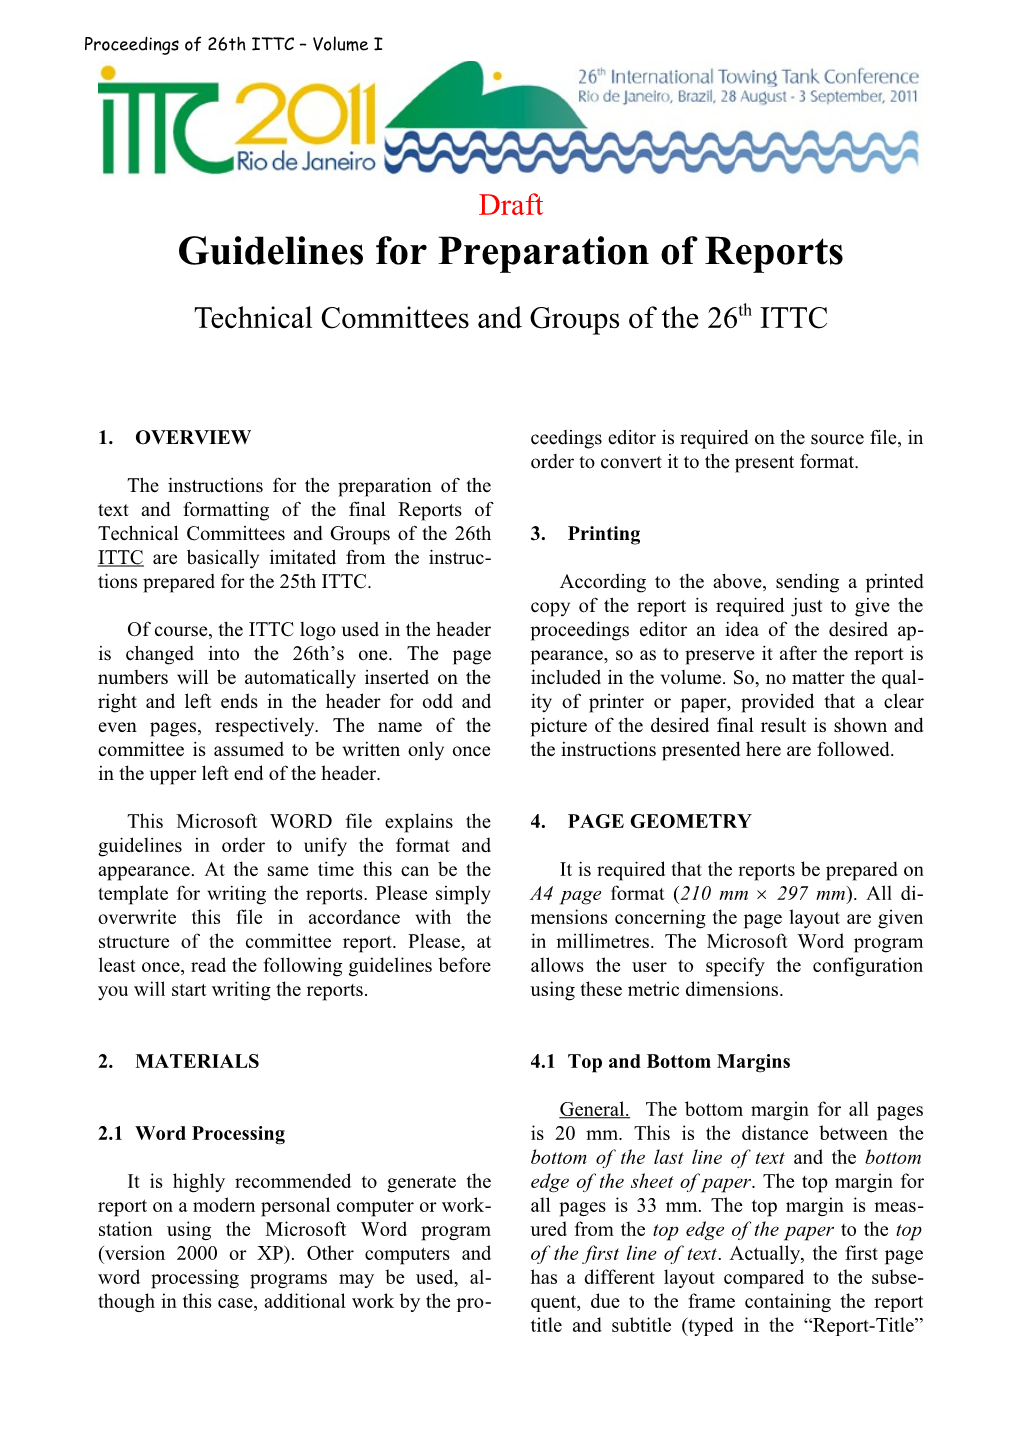 Guidelines for Preparation of Reports